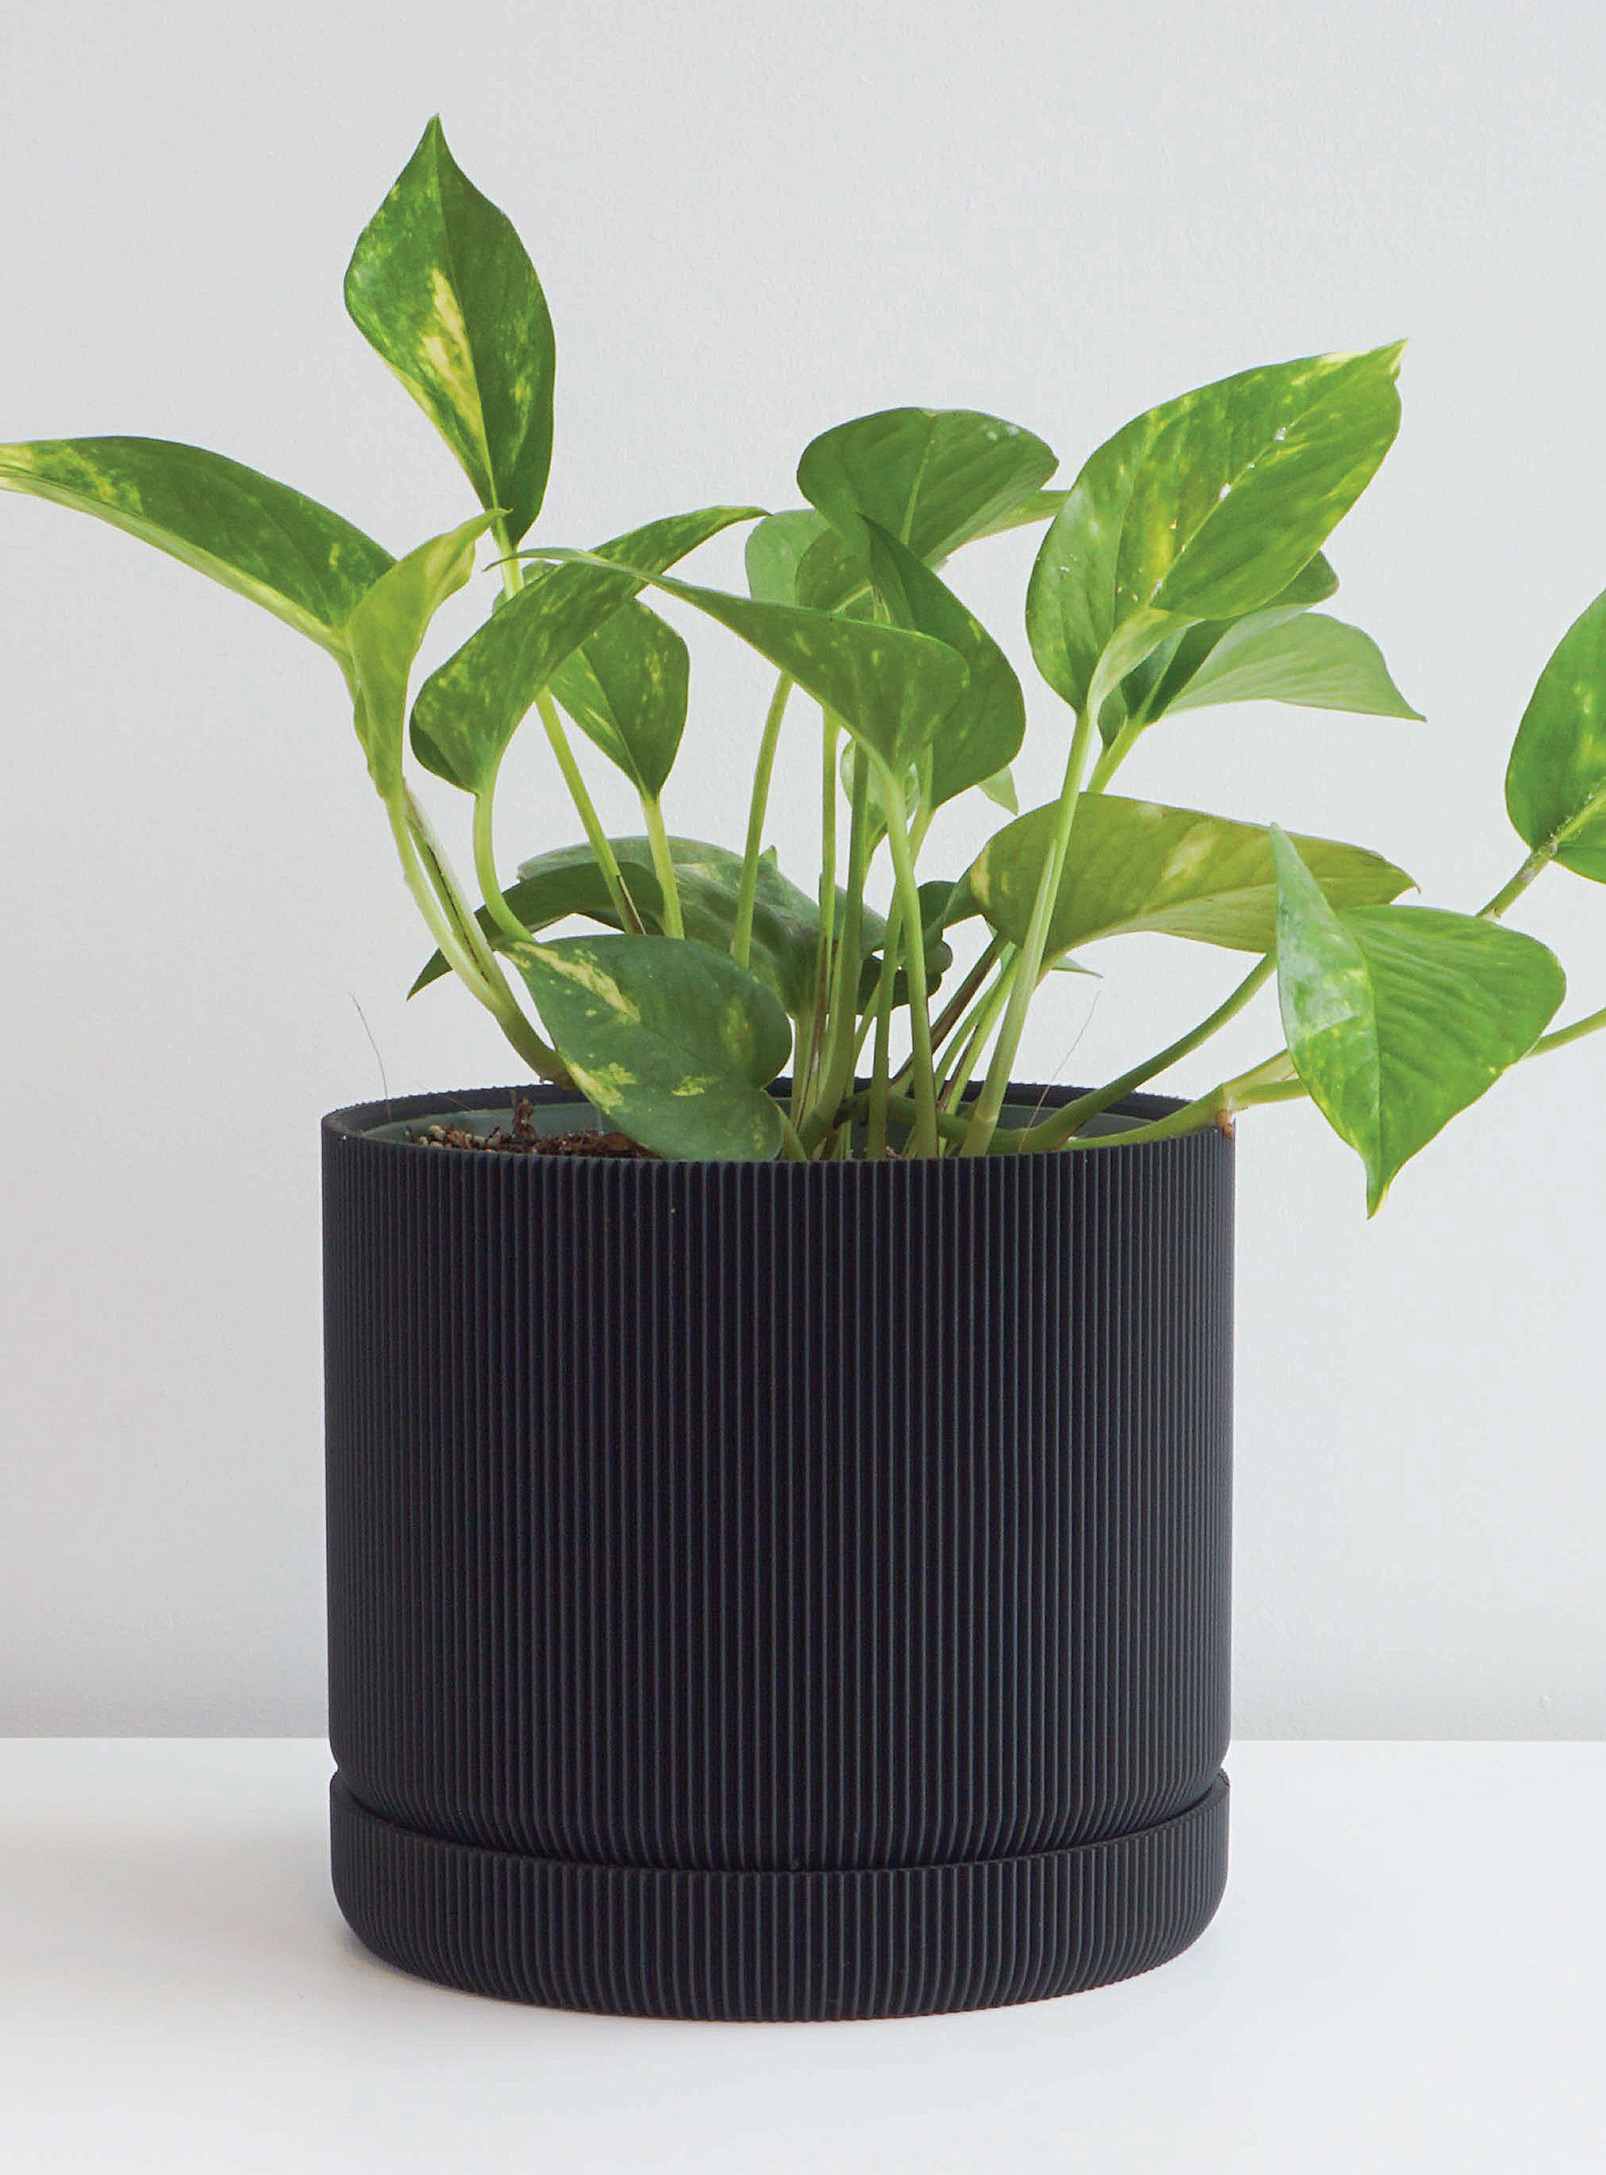 Conifer Homewares Hemlock Plant-based Planter See Available Sizes In Black